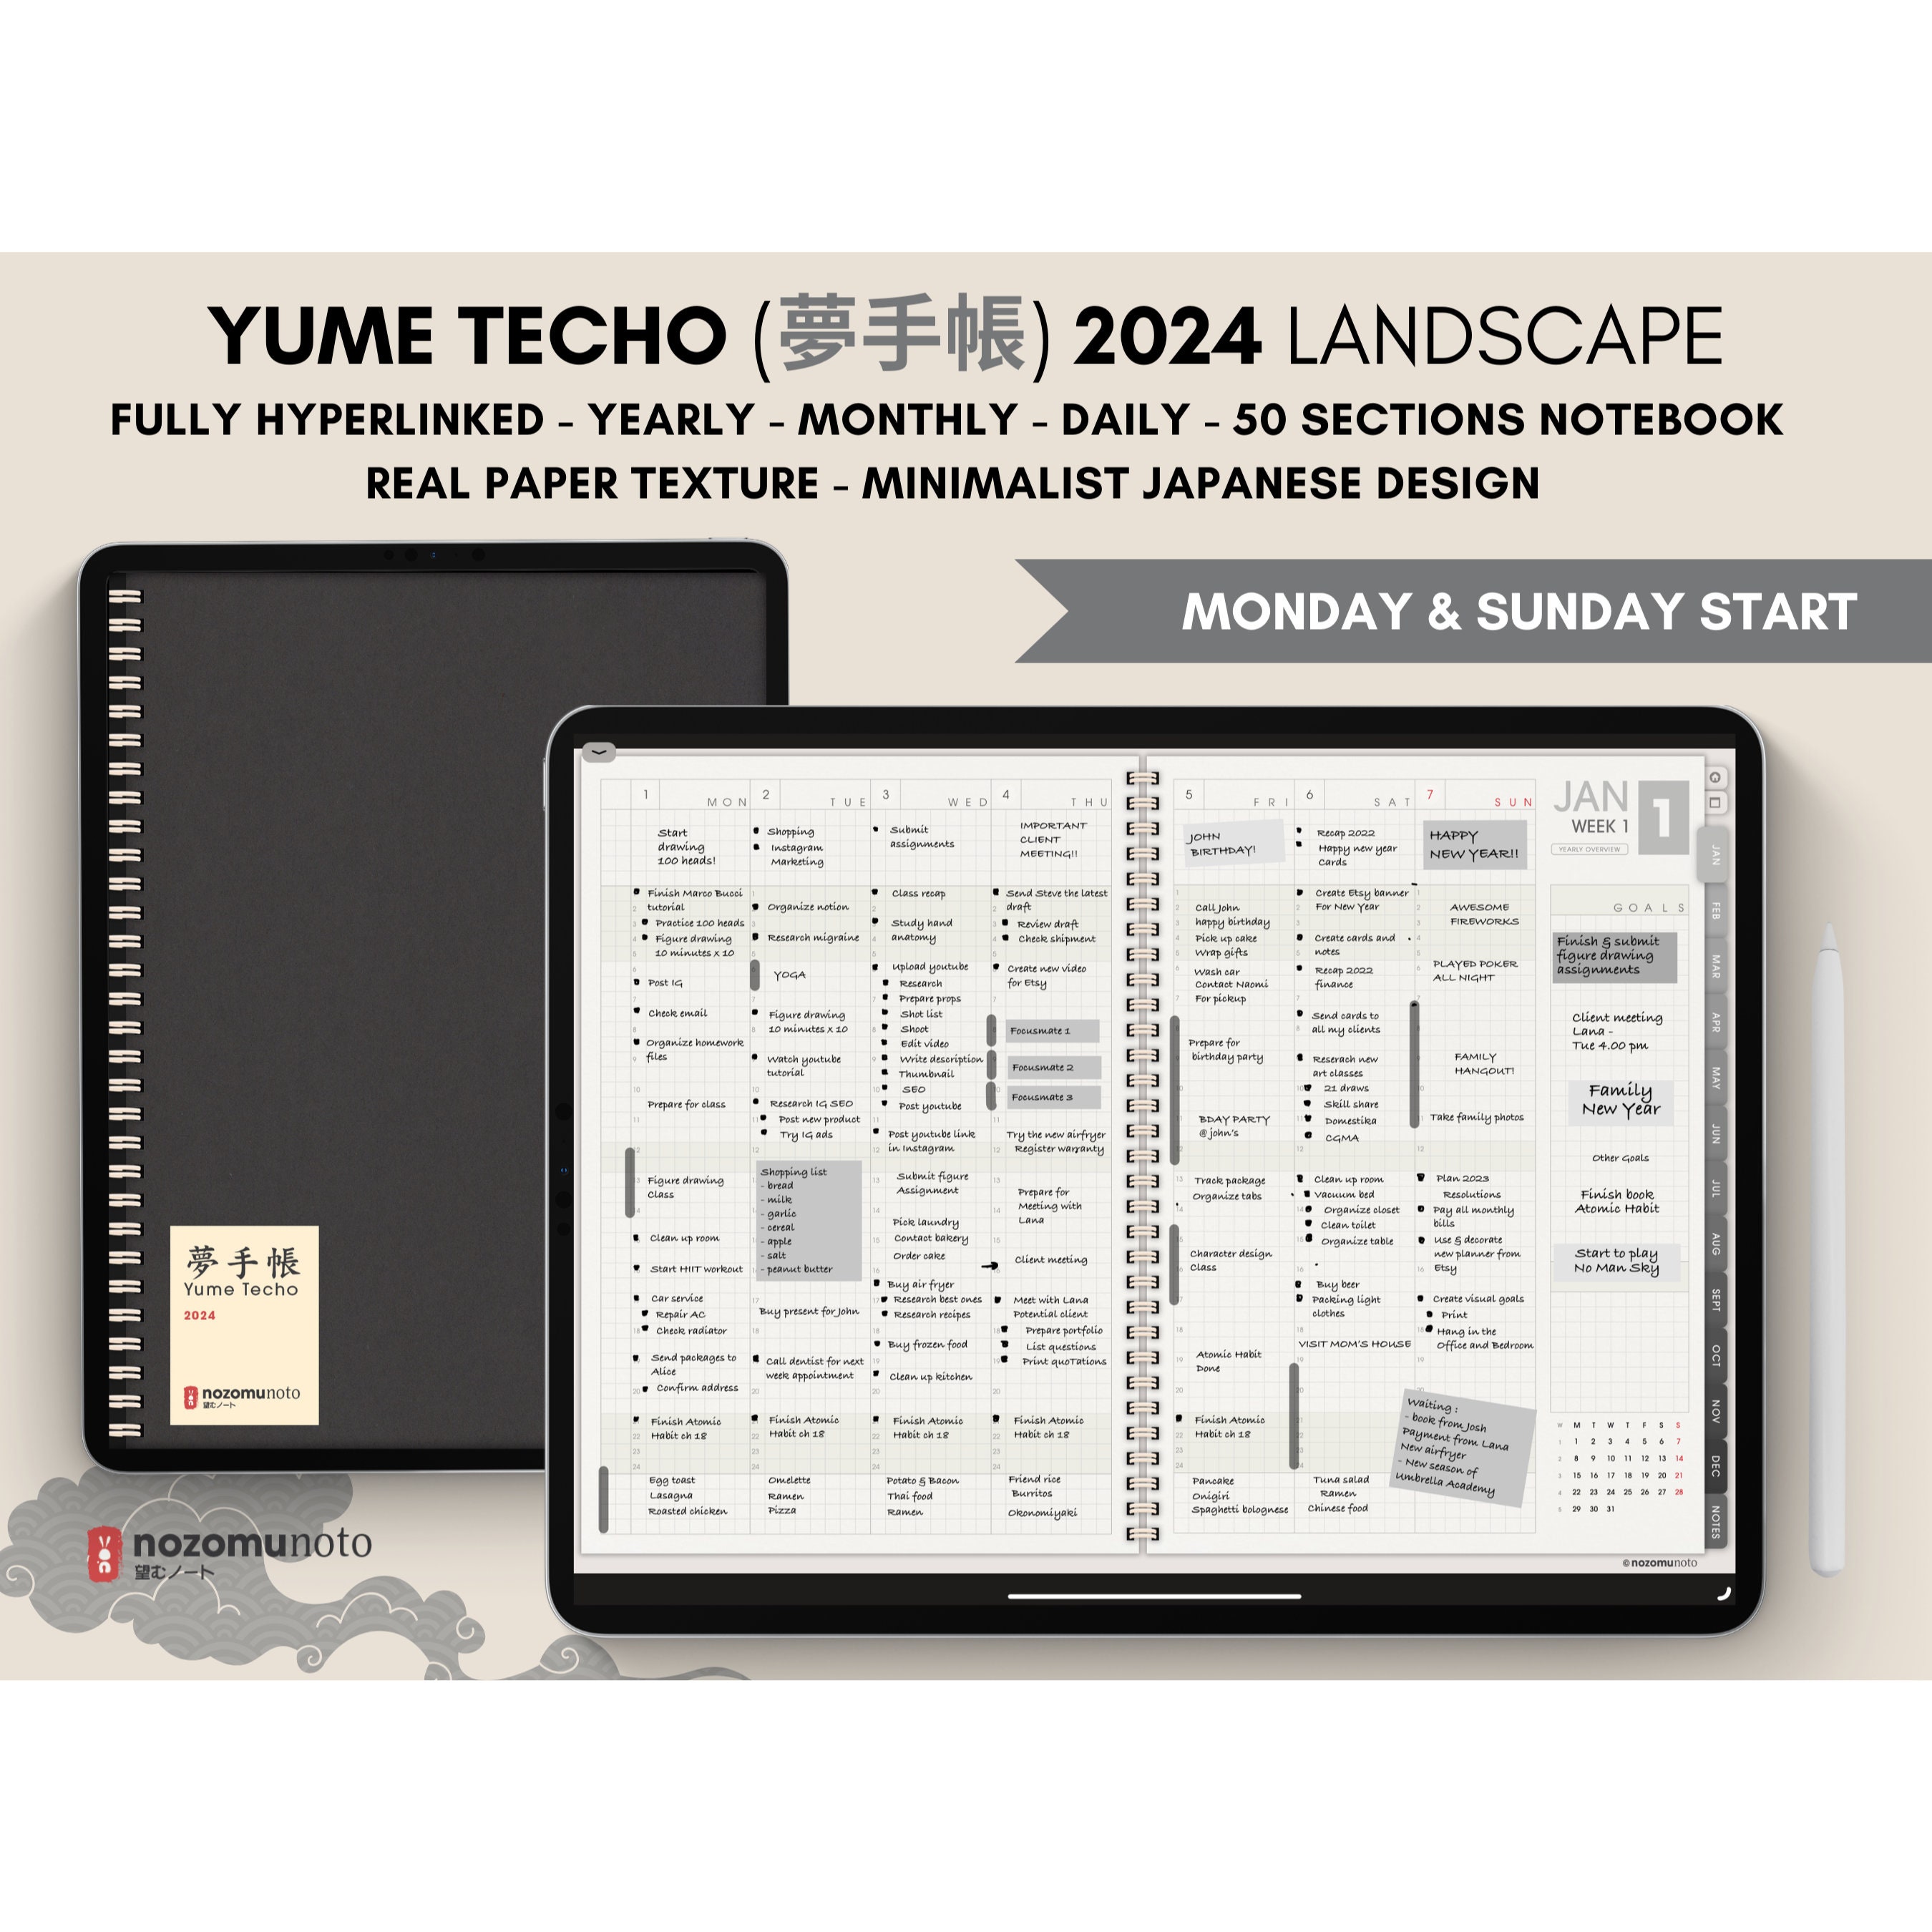 Digital Hobonichi Cousin 2024 Digital Calendar, Bookmarked PDF for Tablets  Like Ipad, Onyx Boox and Remarkable 